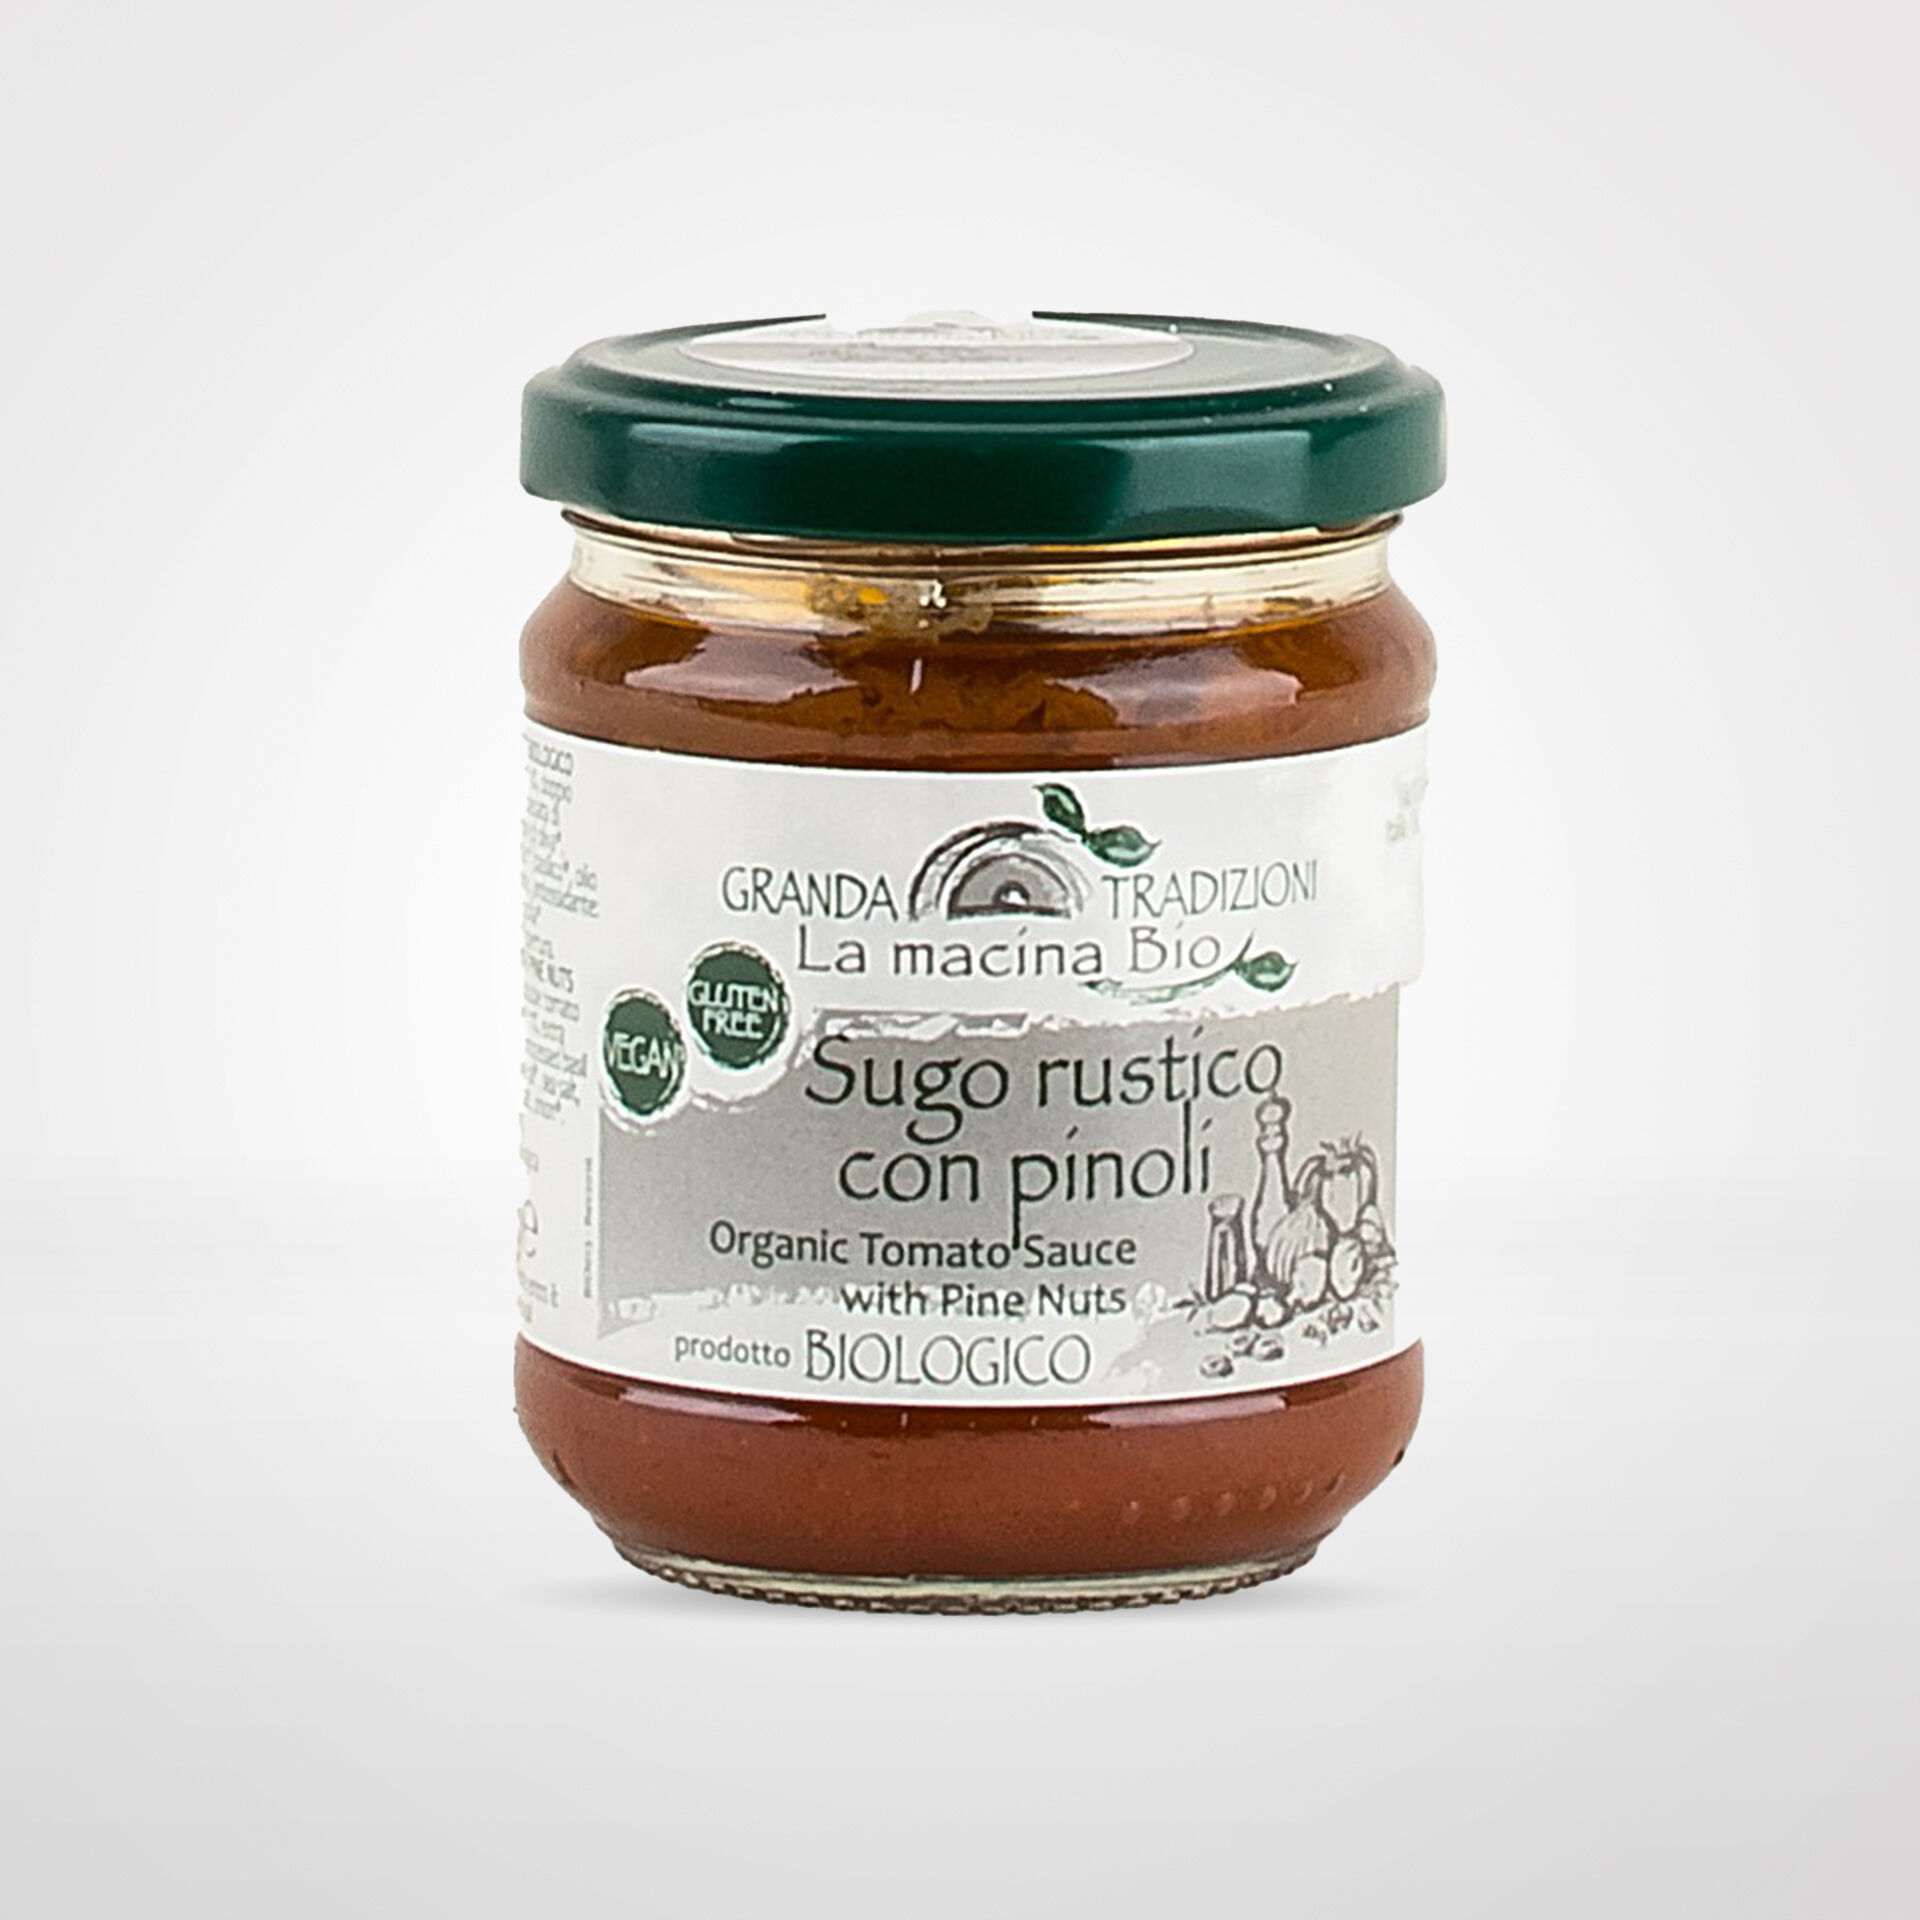 Organic Tomato Sauce with Pine Nuts